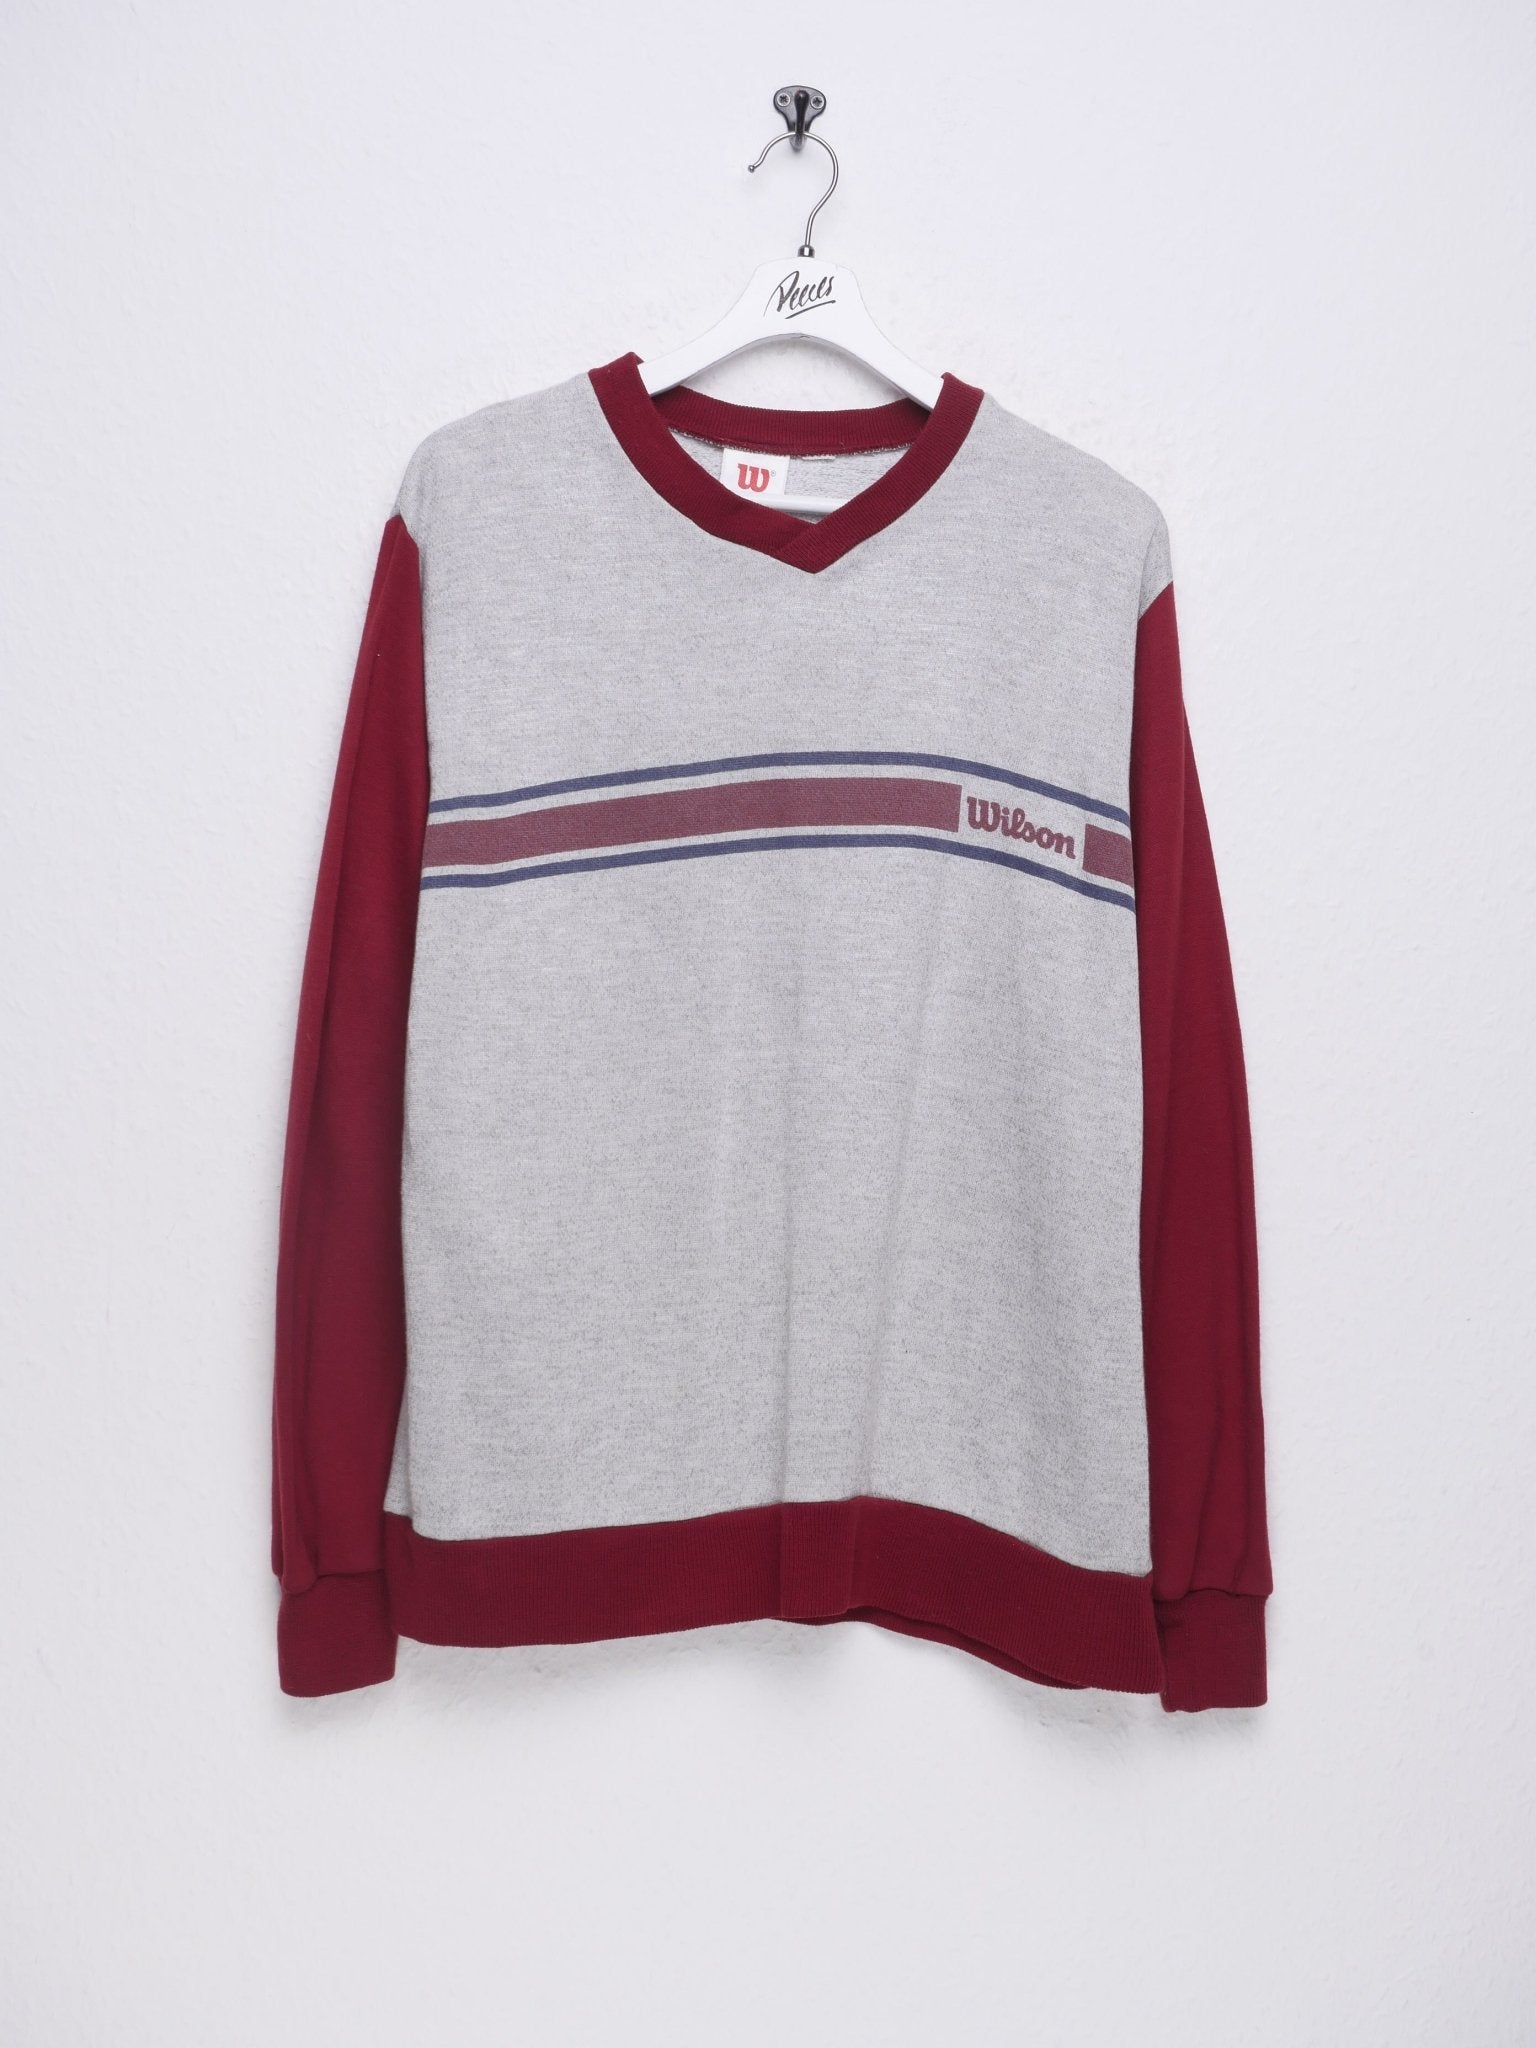 Wilson printed Spellout Vintage Sweater - Peeces